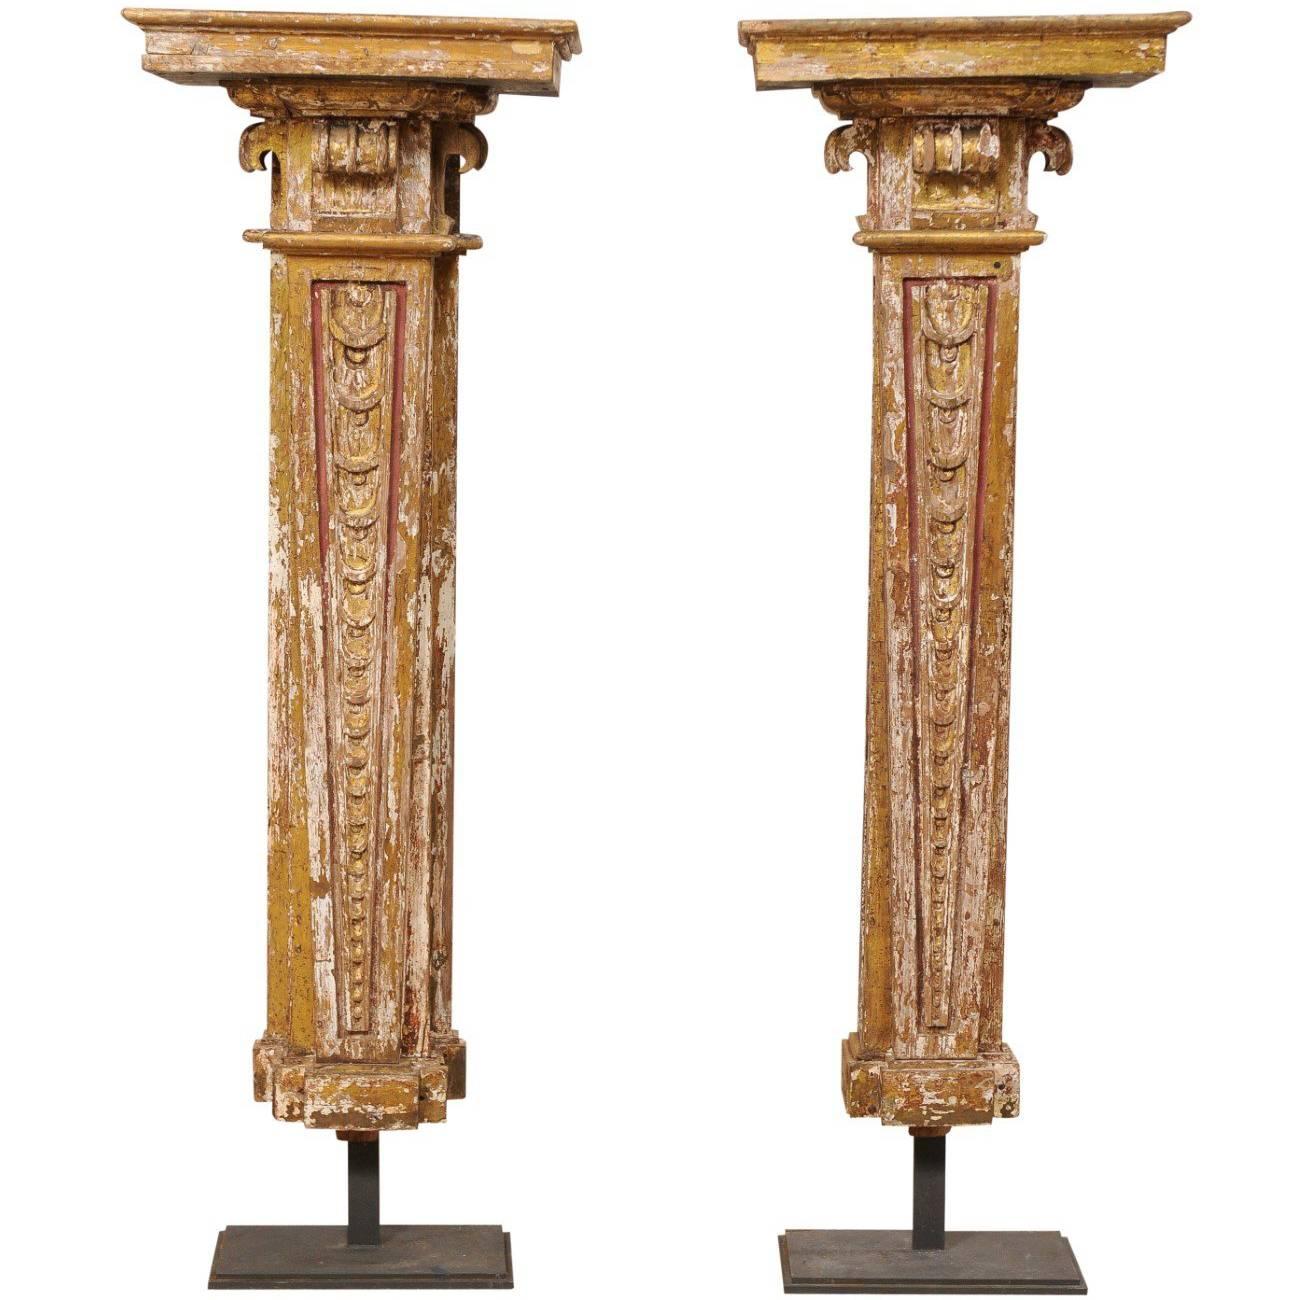 Early 18th Century Italian Pair Exquisite Columns on Custom Stands, 6 Ft. Tall